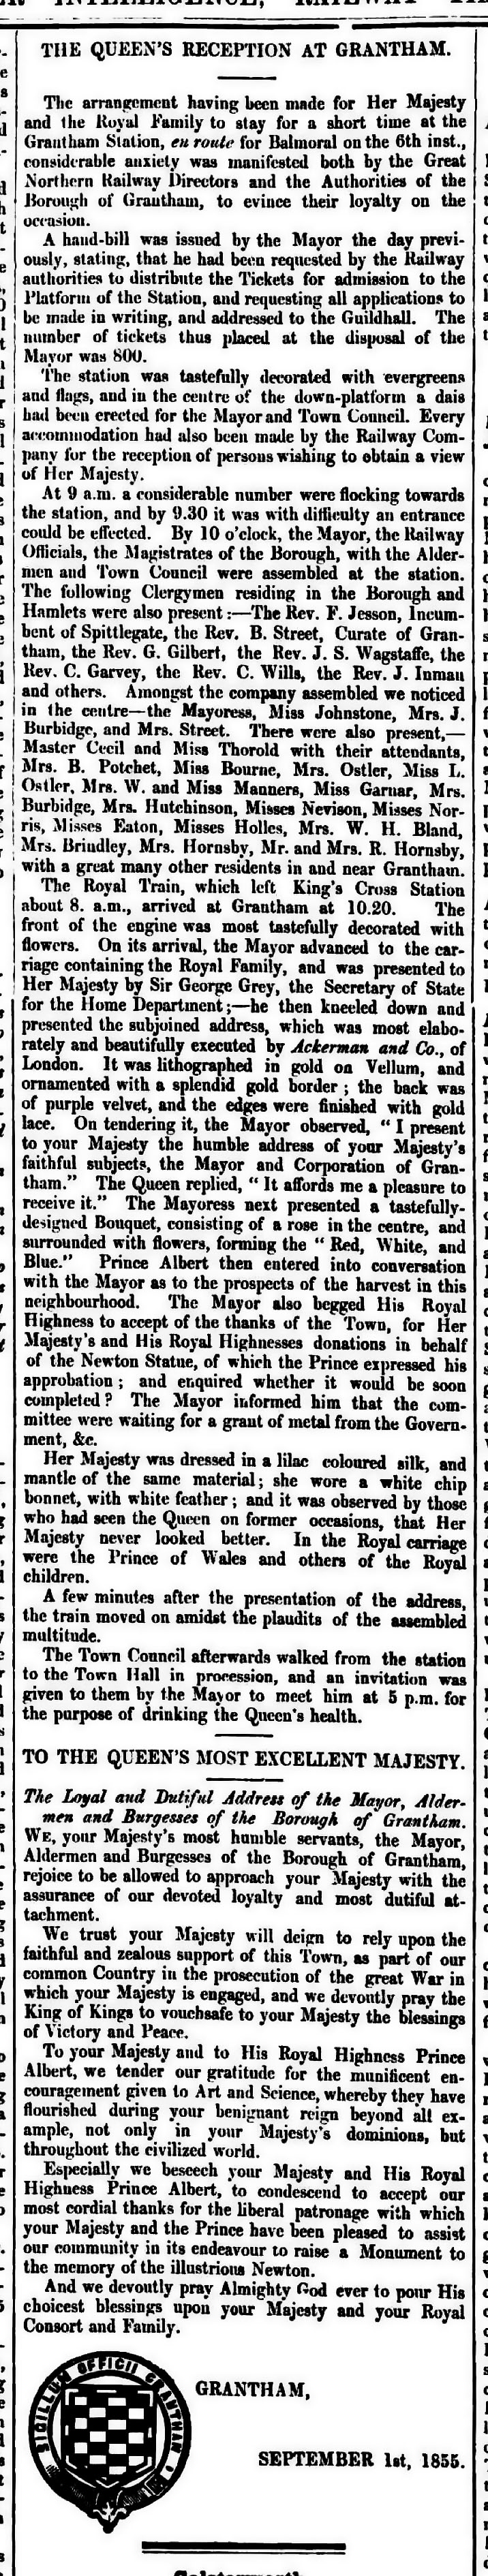 The Grantham Journal 15th September 1855, page 4 From The British Newspaper Archive Image © THE BRITISH LIBRARY BOARD. ALL RIGHTS RESERVED.